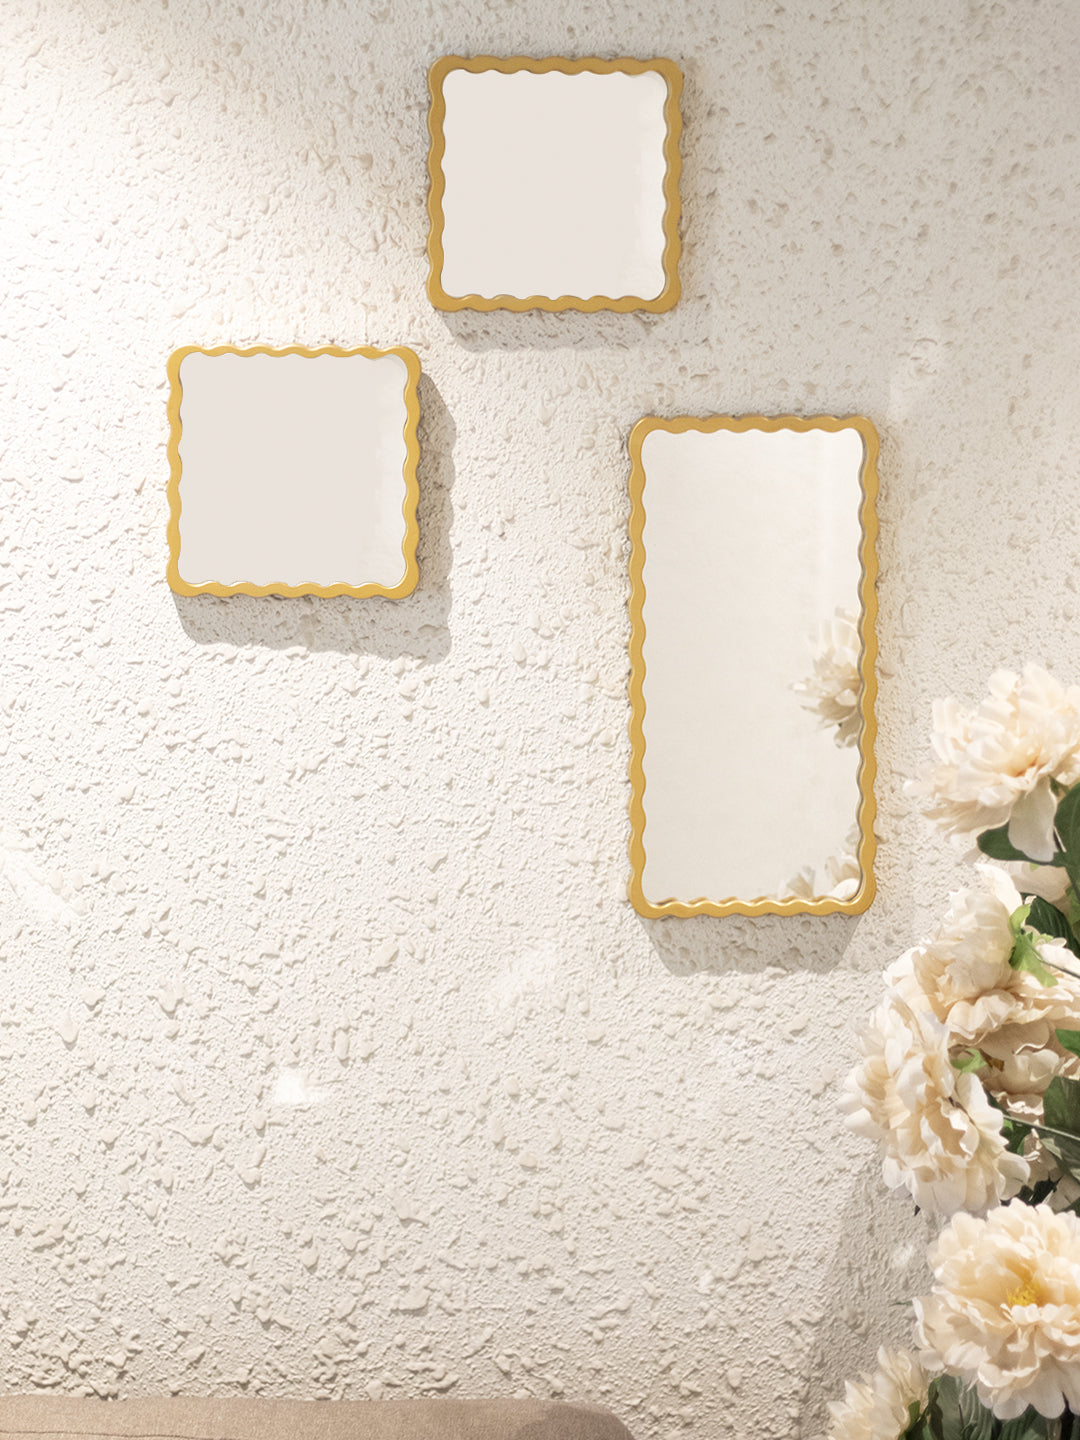 VON CASA Decorative Wall Mirrors For Home Decoration (Set of 3 Mirrors)